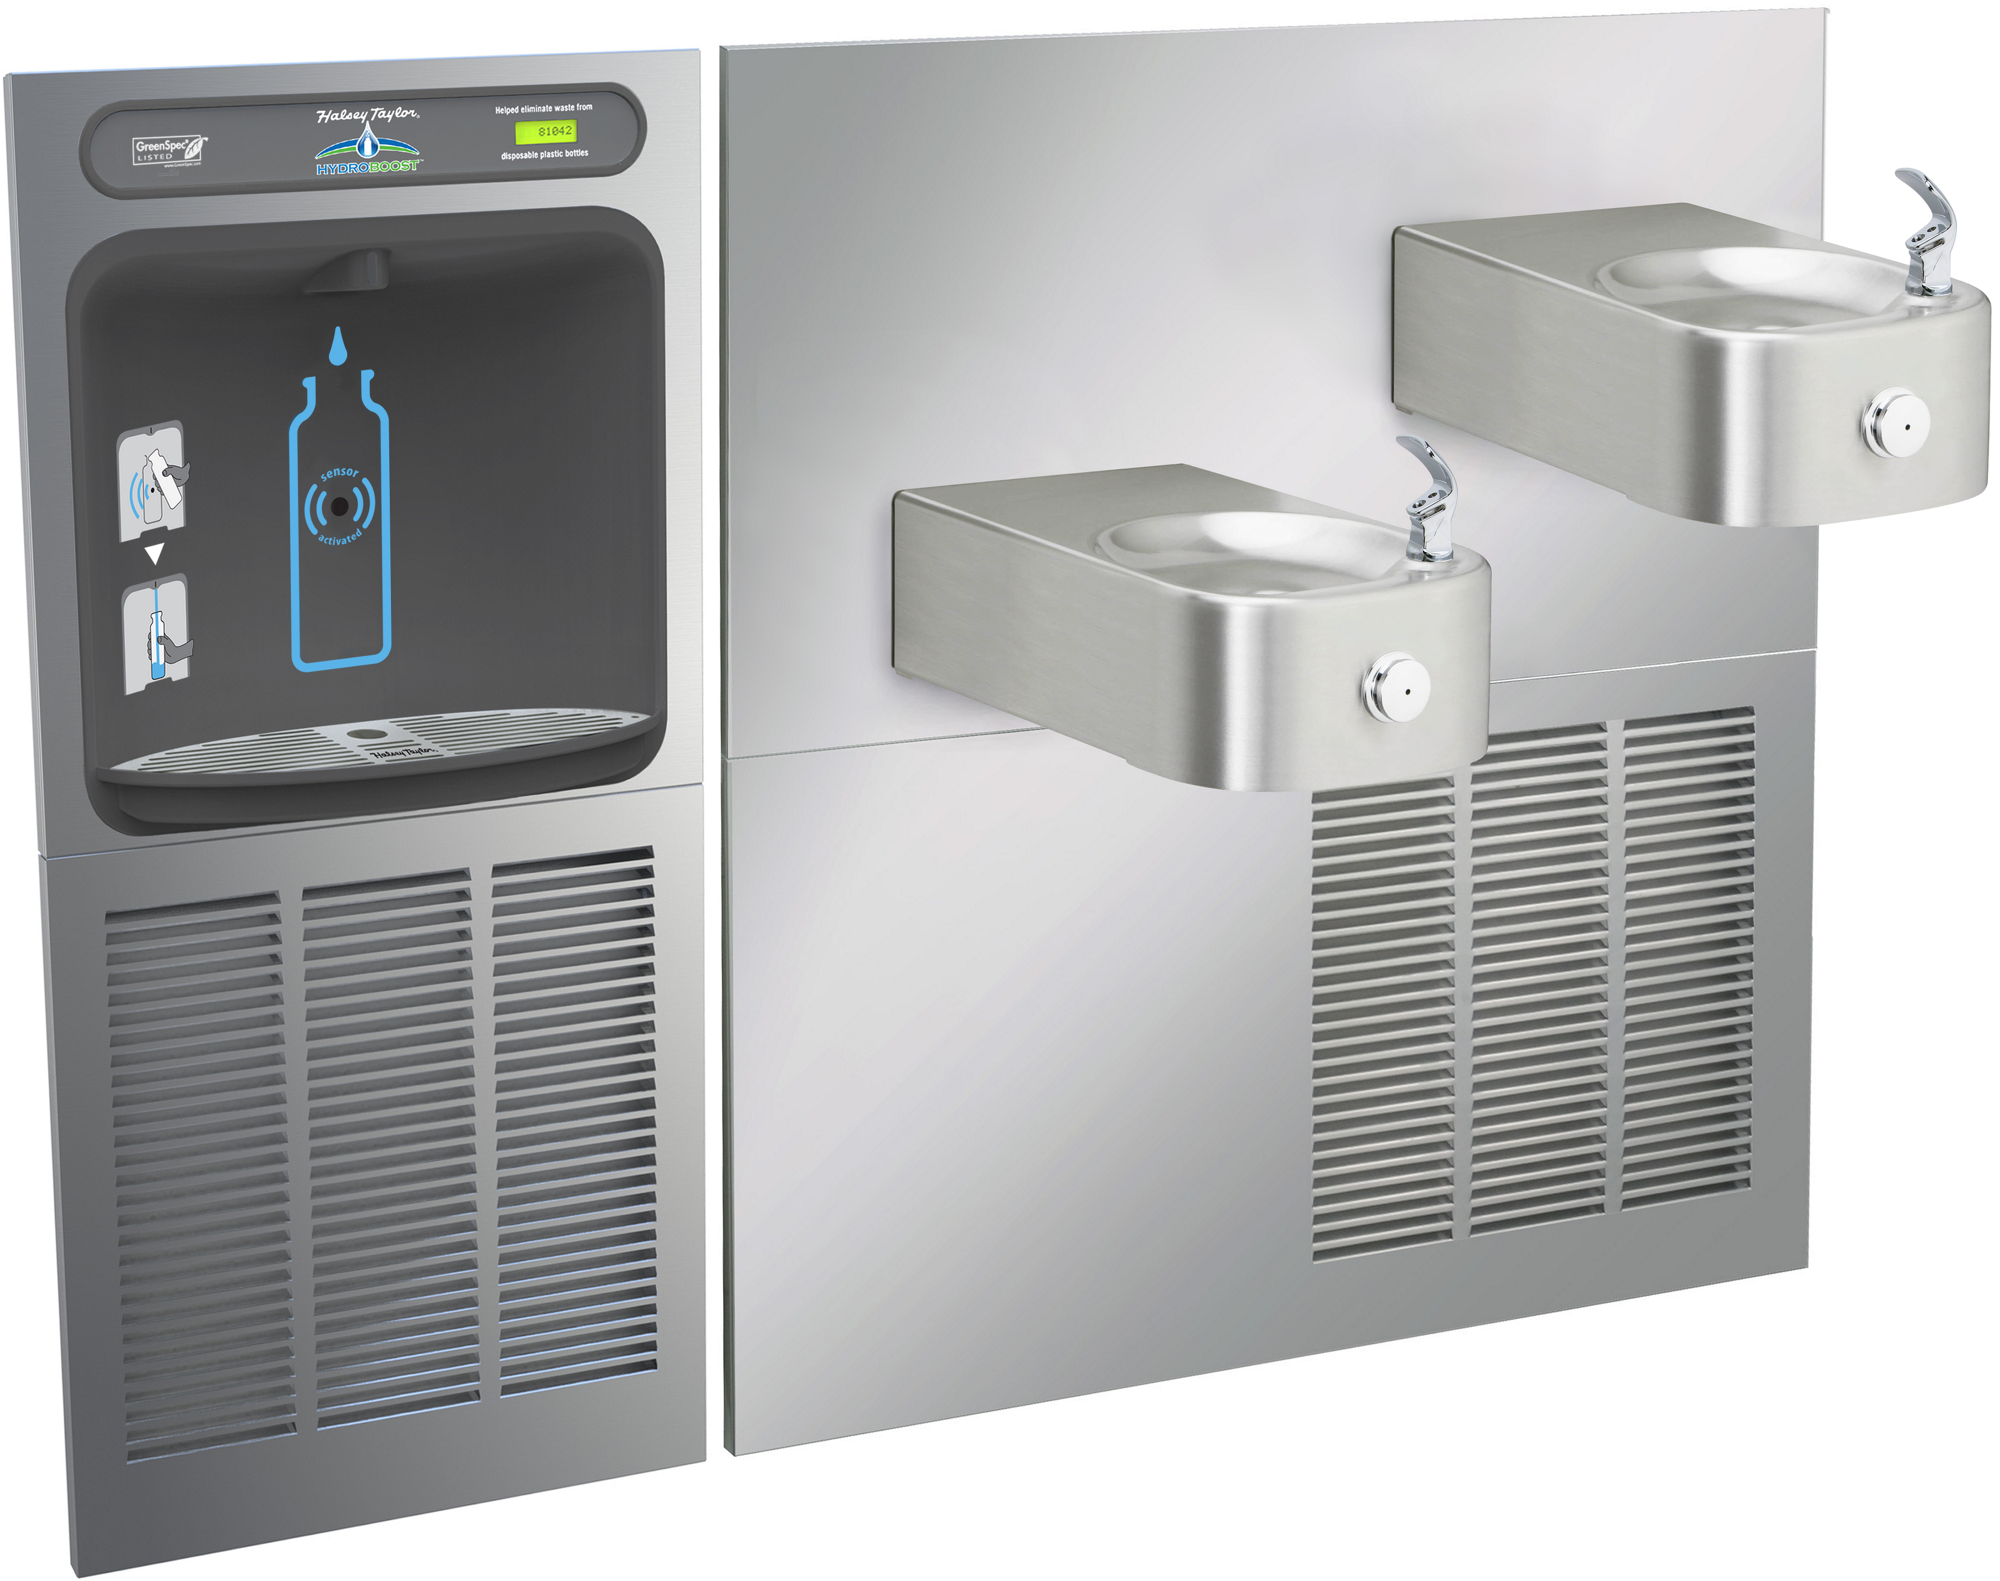 Halsey Taylor HTHB-HRFSER | In-wall Bi-level Bottle Filling Station | Filterless, Refrigerated, Contour drinking fountains, Stainless Steel color finish